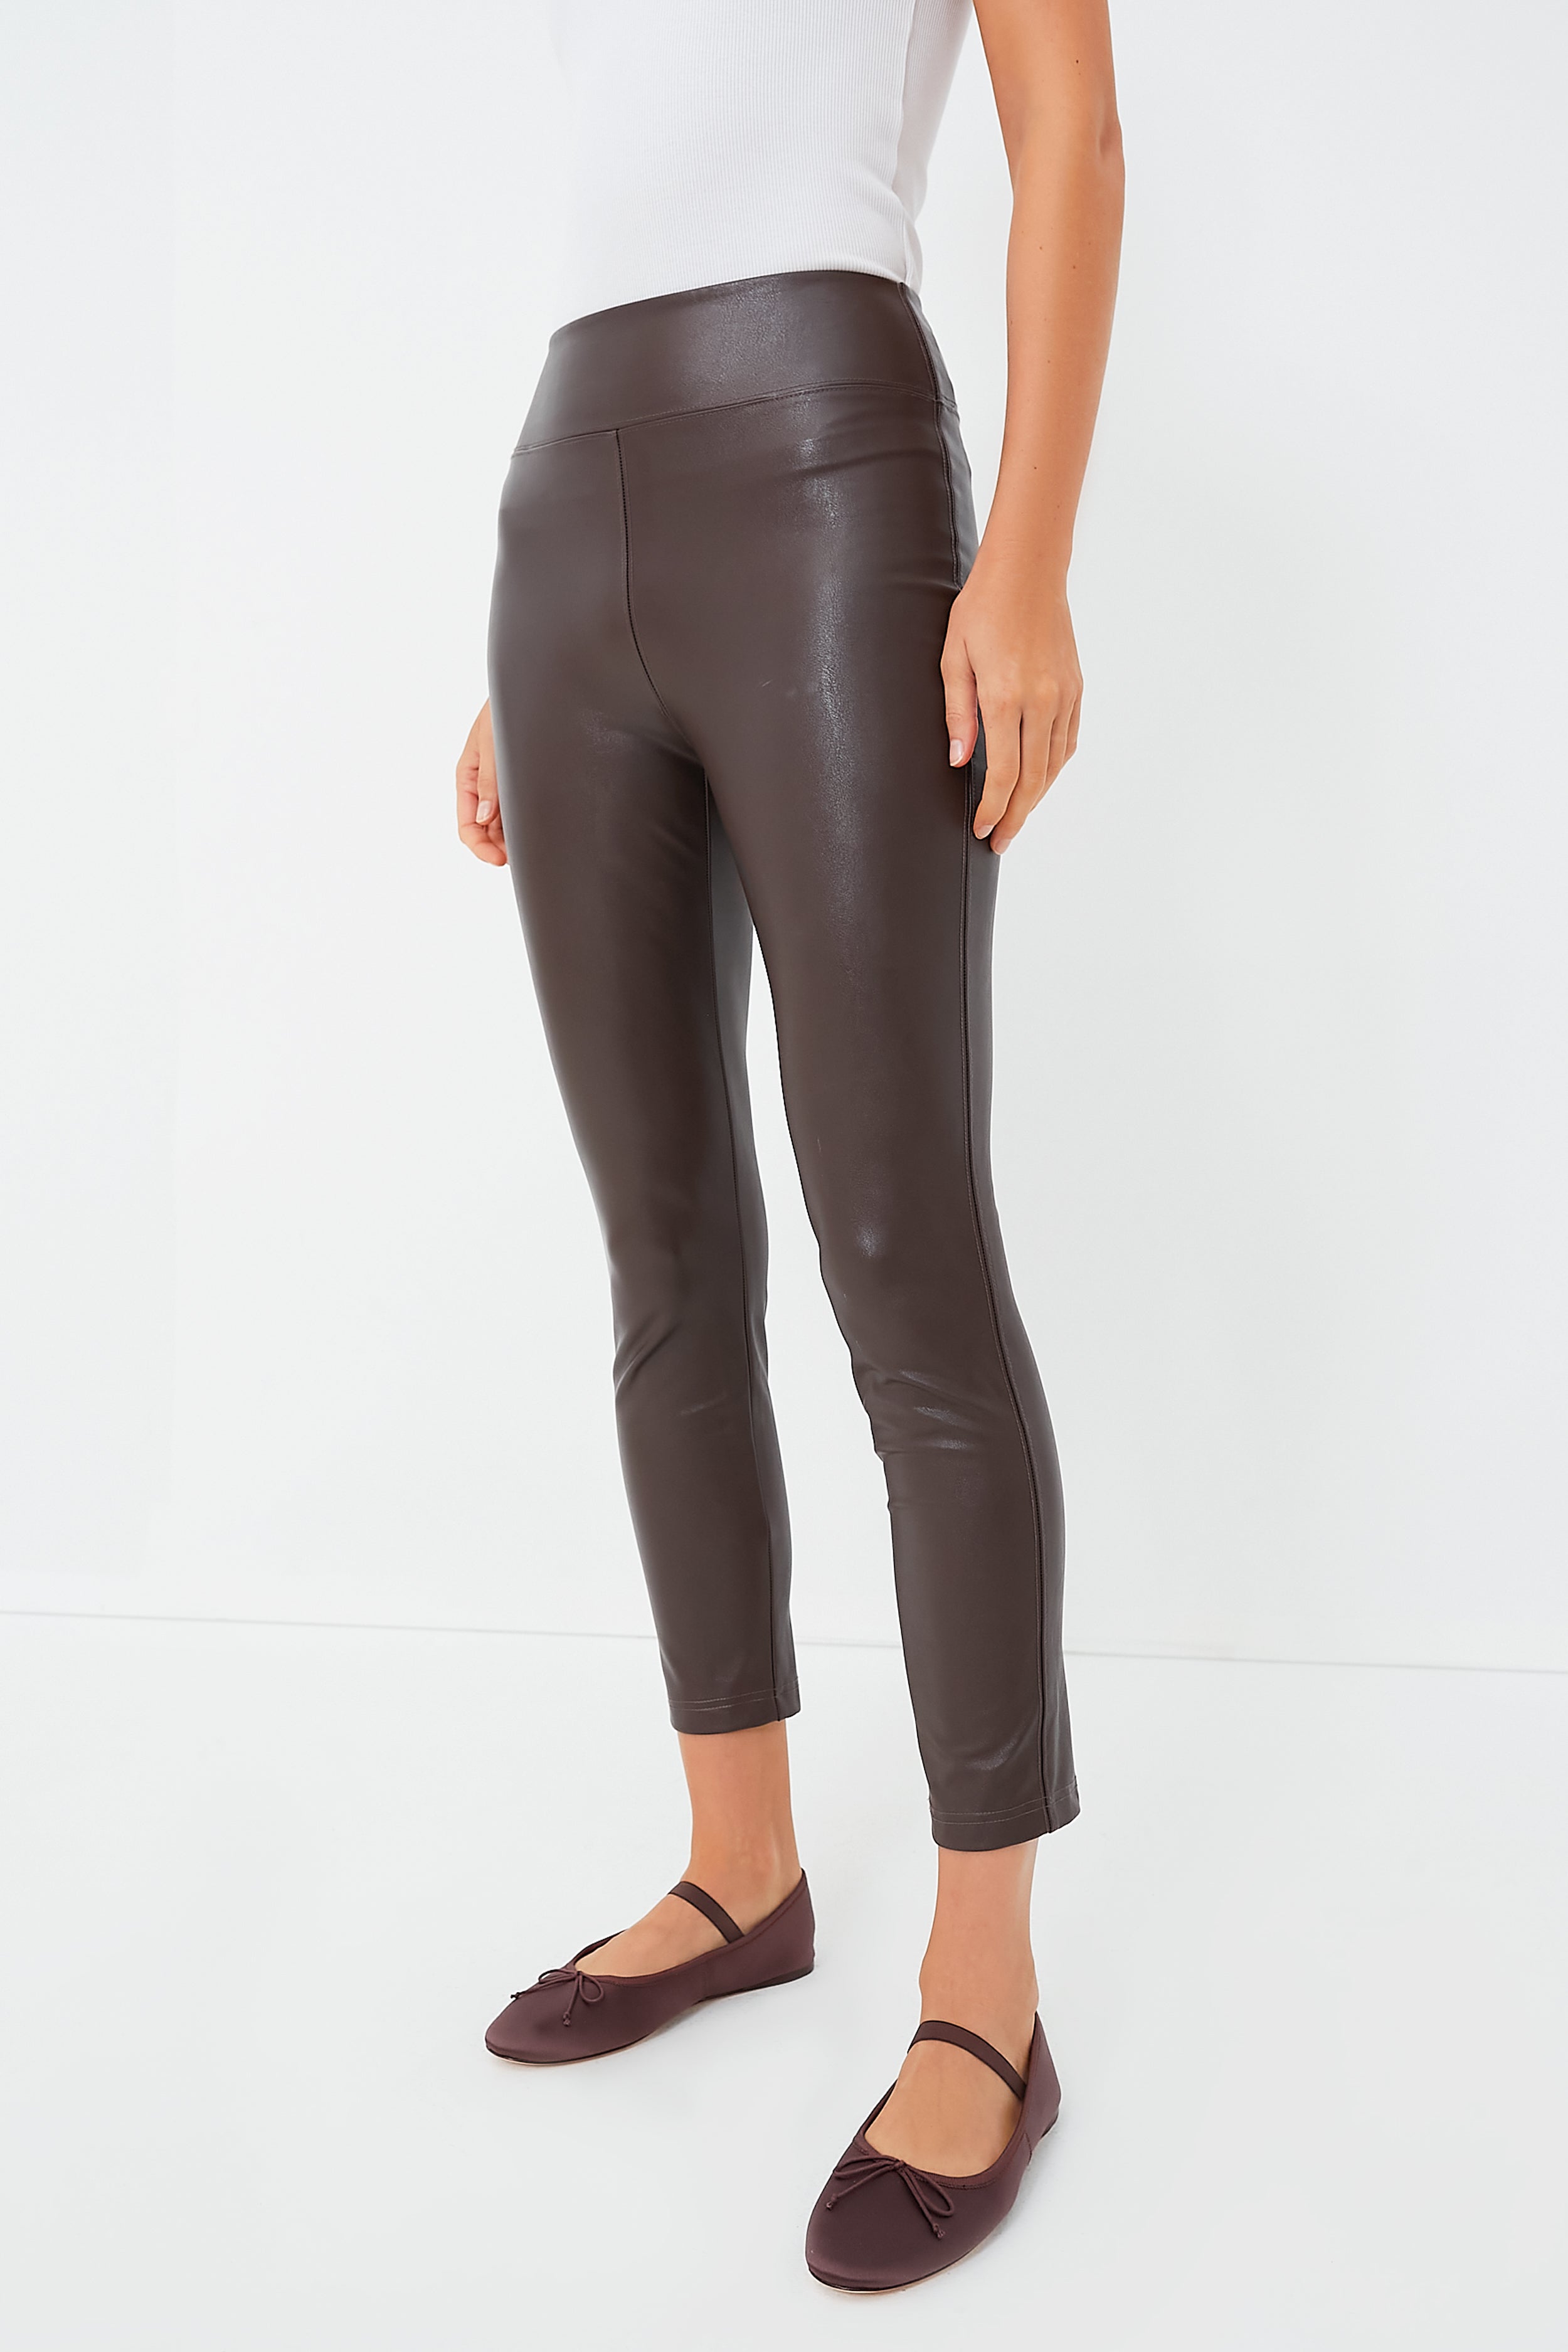 Spanx Inspired Faux Leather Legging - In Bloom Boutique